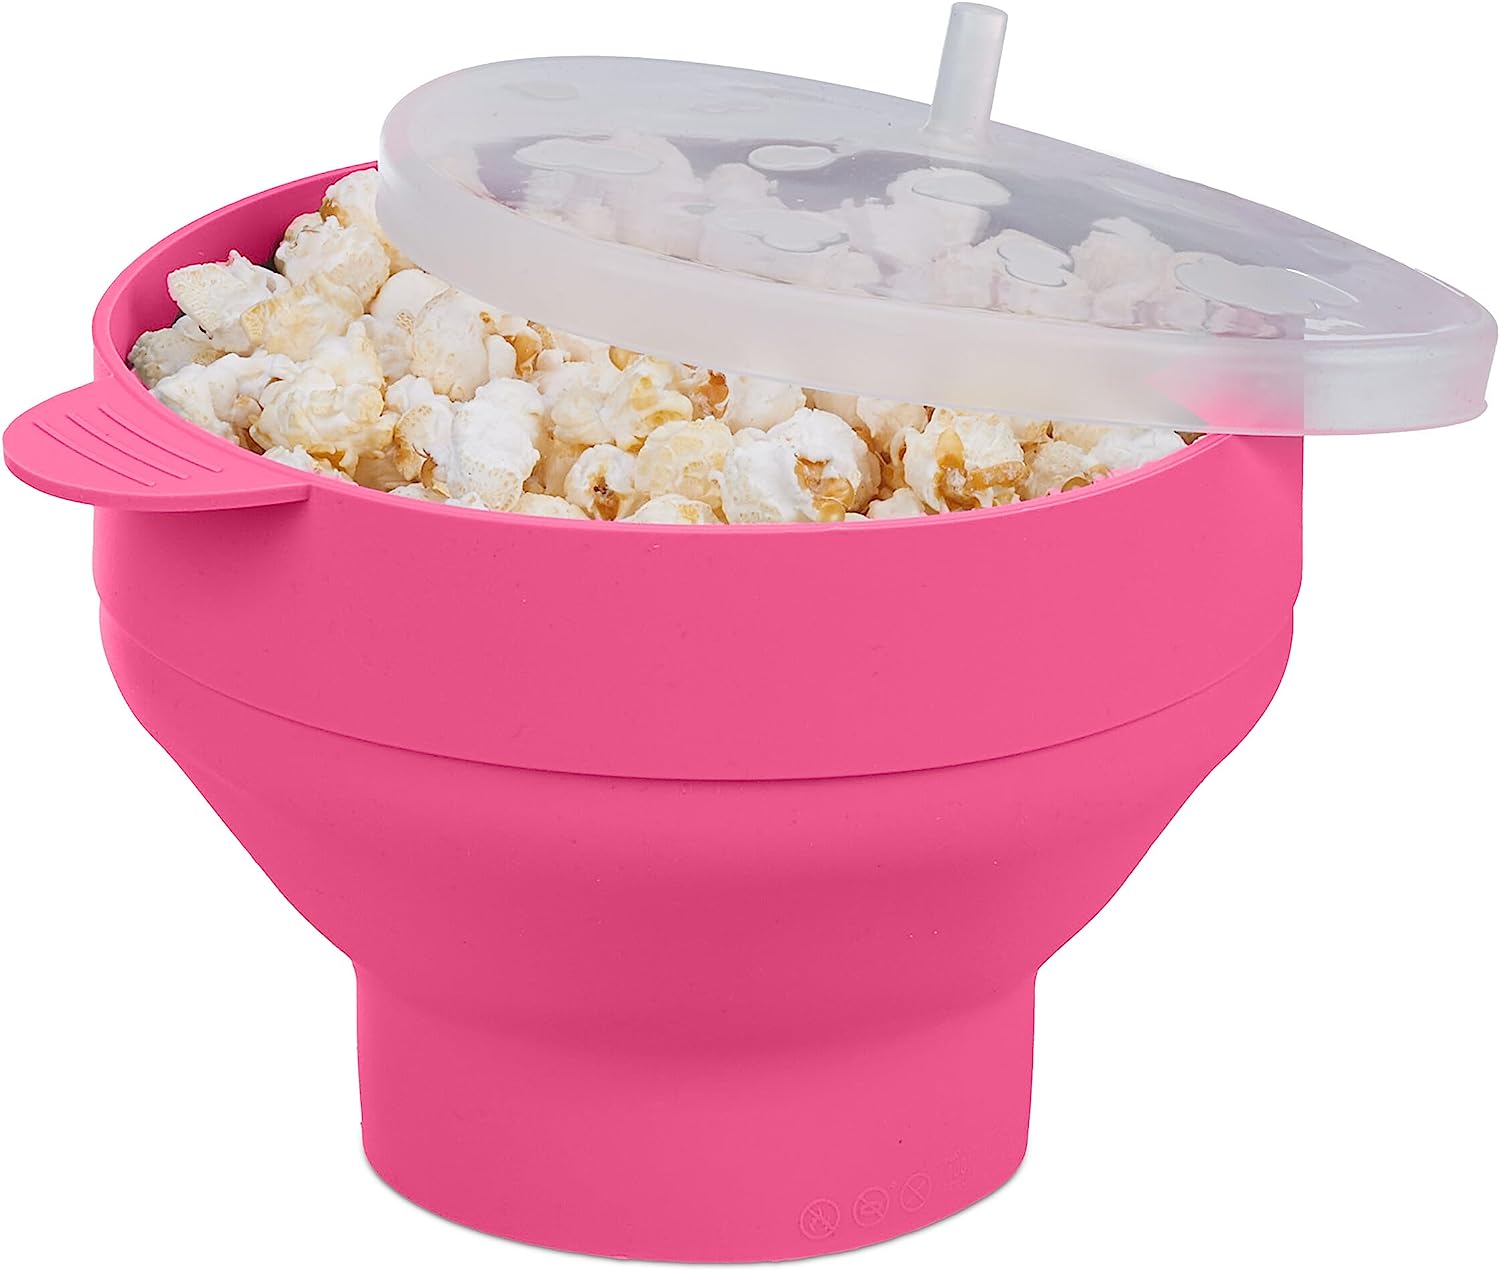 Relaxdays Microwave Popcorn Maker Silicone BPA Free Popcorn Popper with Lid & Handles Foldable Pink